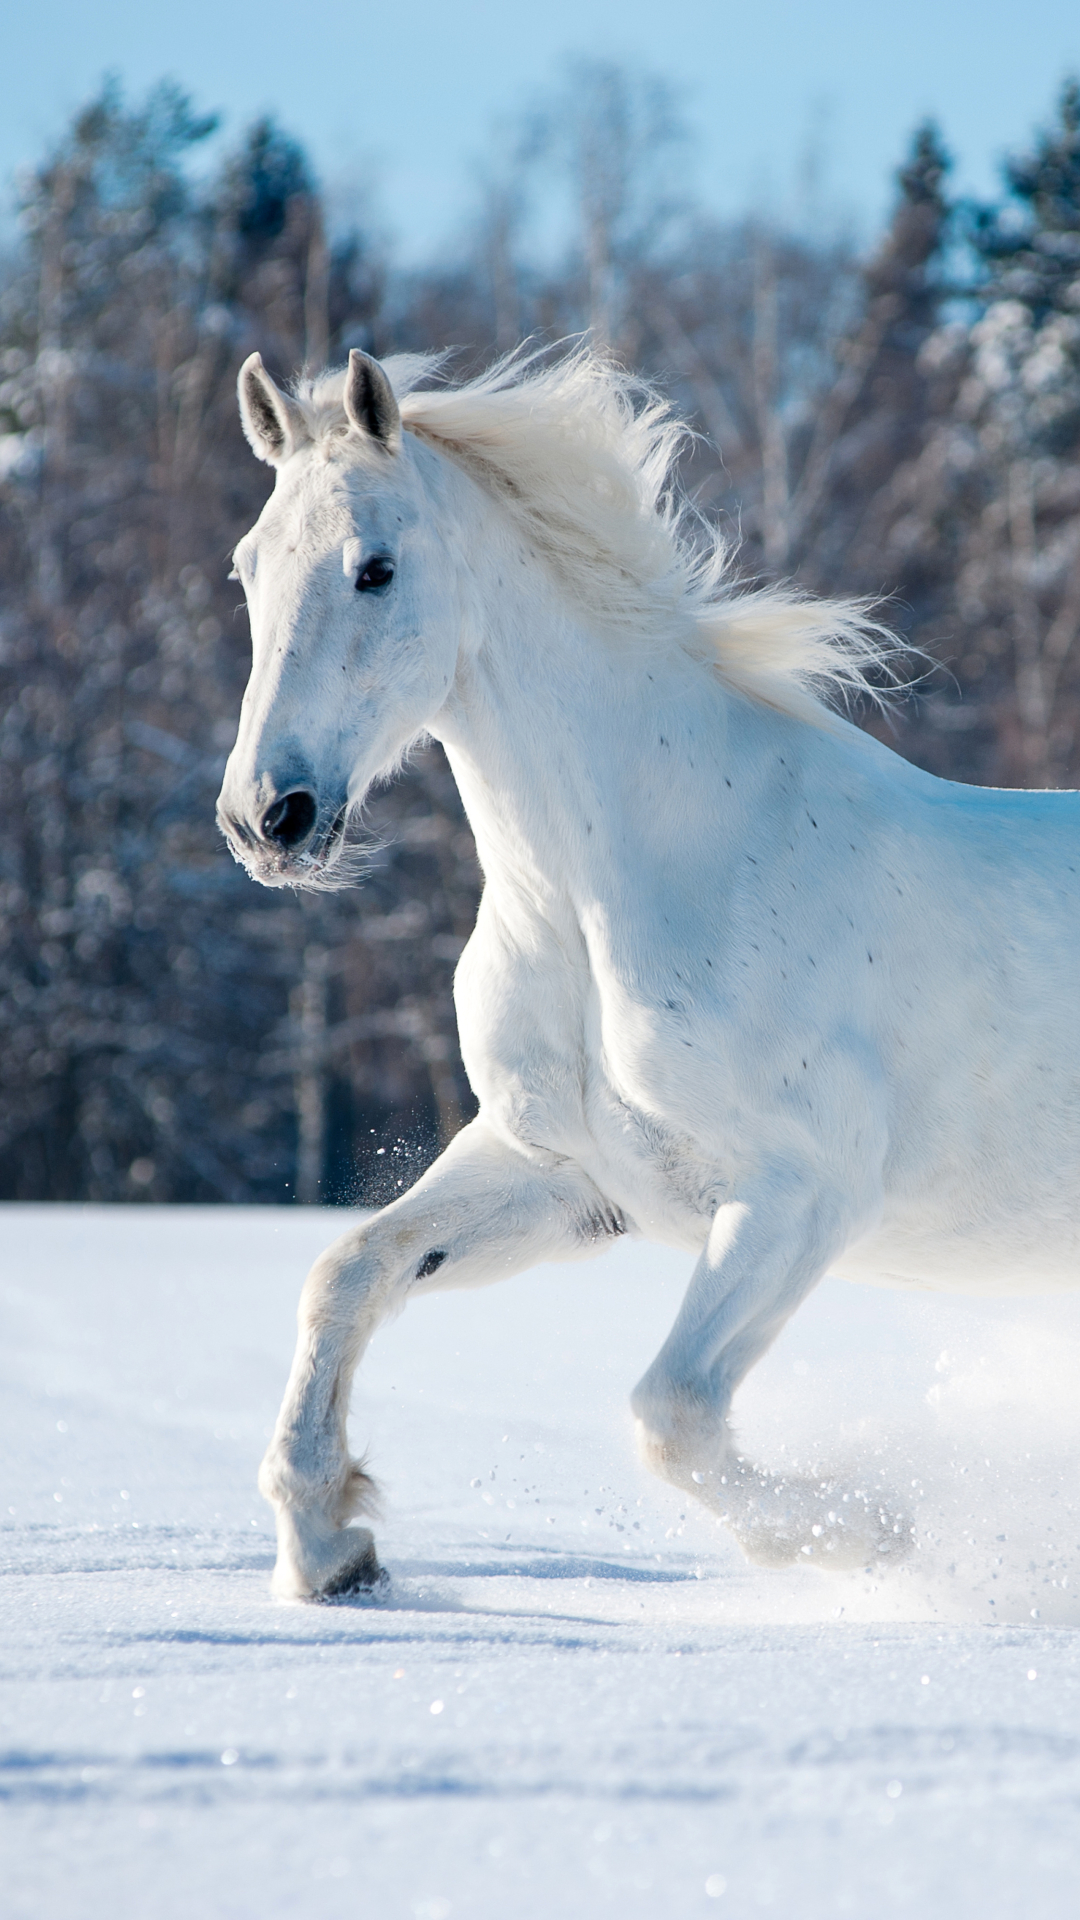 1080x1920 A white horse running through the snow Mobile Abyss